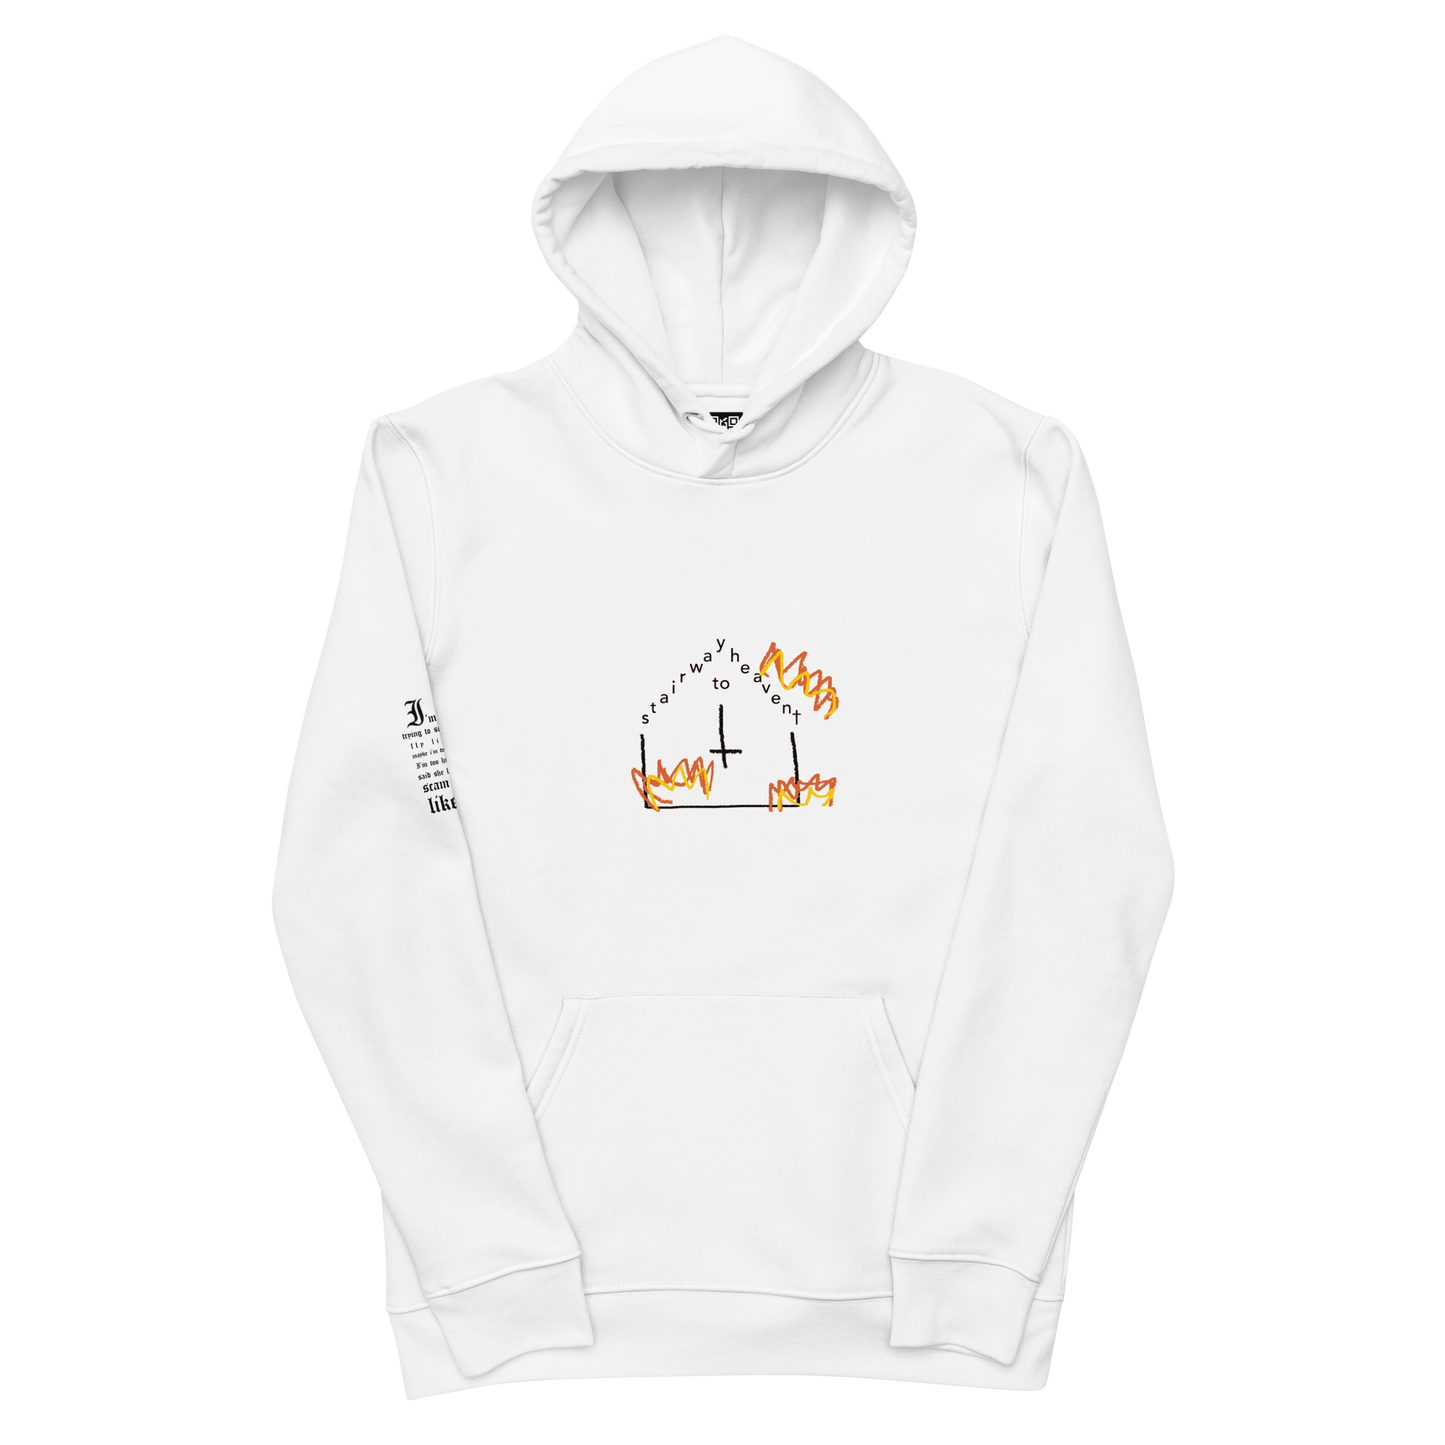 limited edition "stairway to heaven" hoodies ver. 1